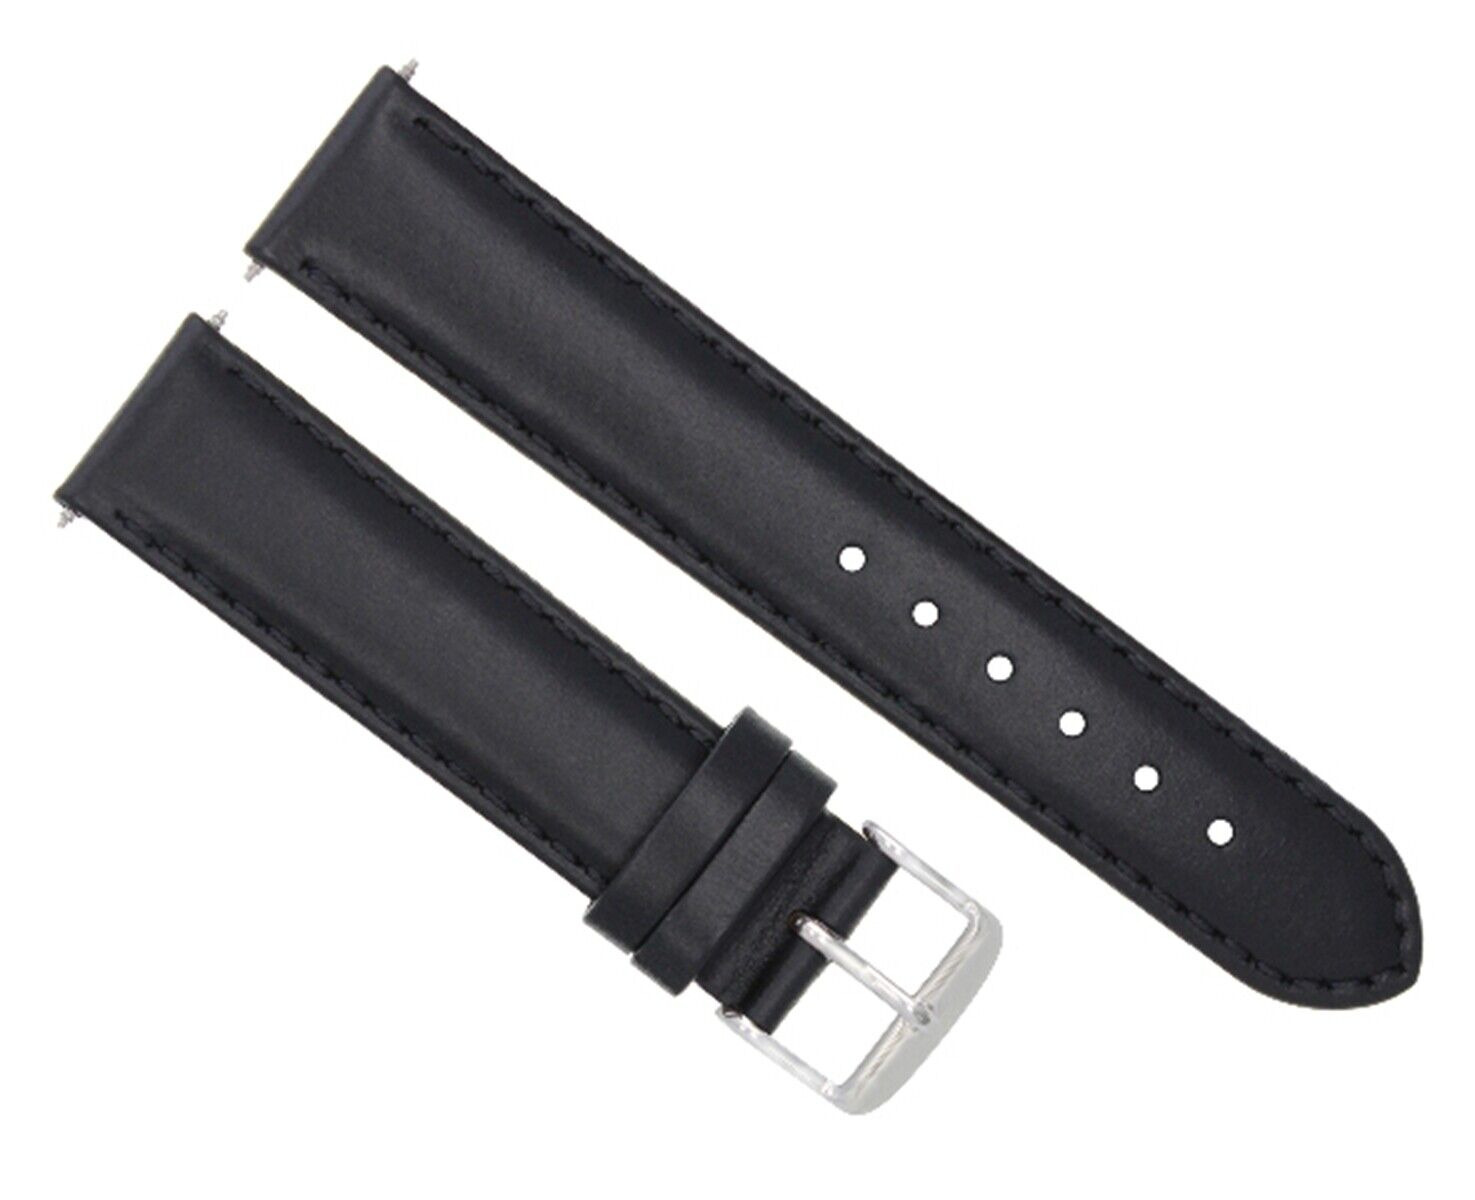 24MM GENUINE LEATHER WATCH STRAP SMOOTH BAND FOR SONY SMART WATCH 2 II BLACK